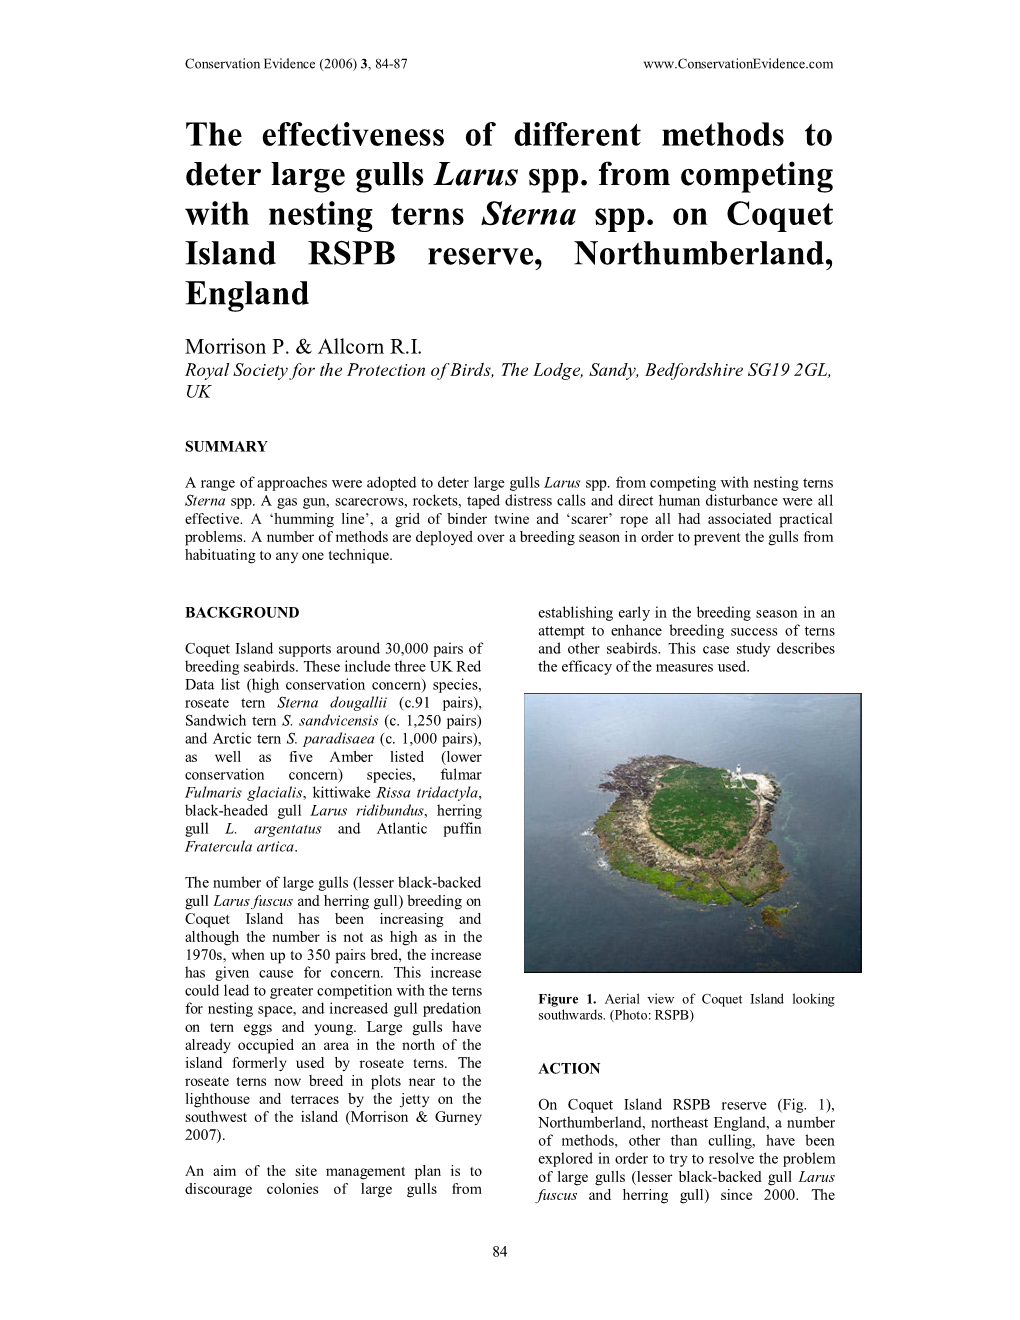 The Effectiveness of Different Methods to Deter Large Gulls Larus Spp. from Competing with Nesting Terns Sterna Spp. on Coquet I